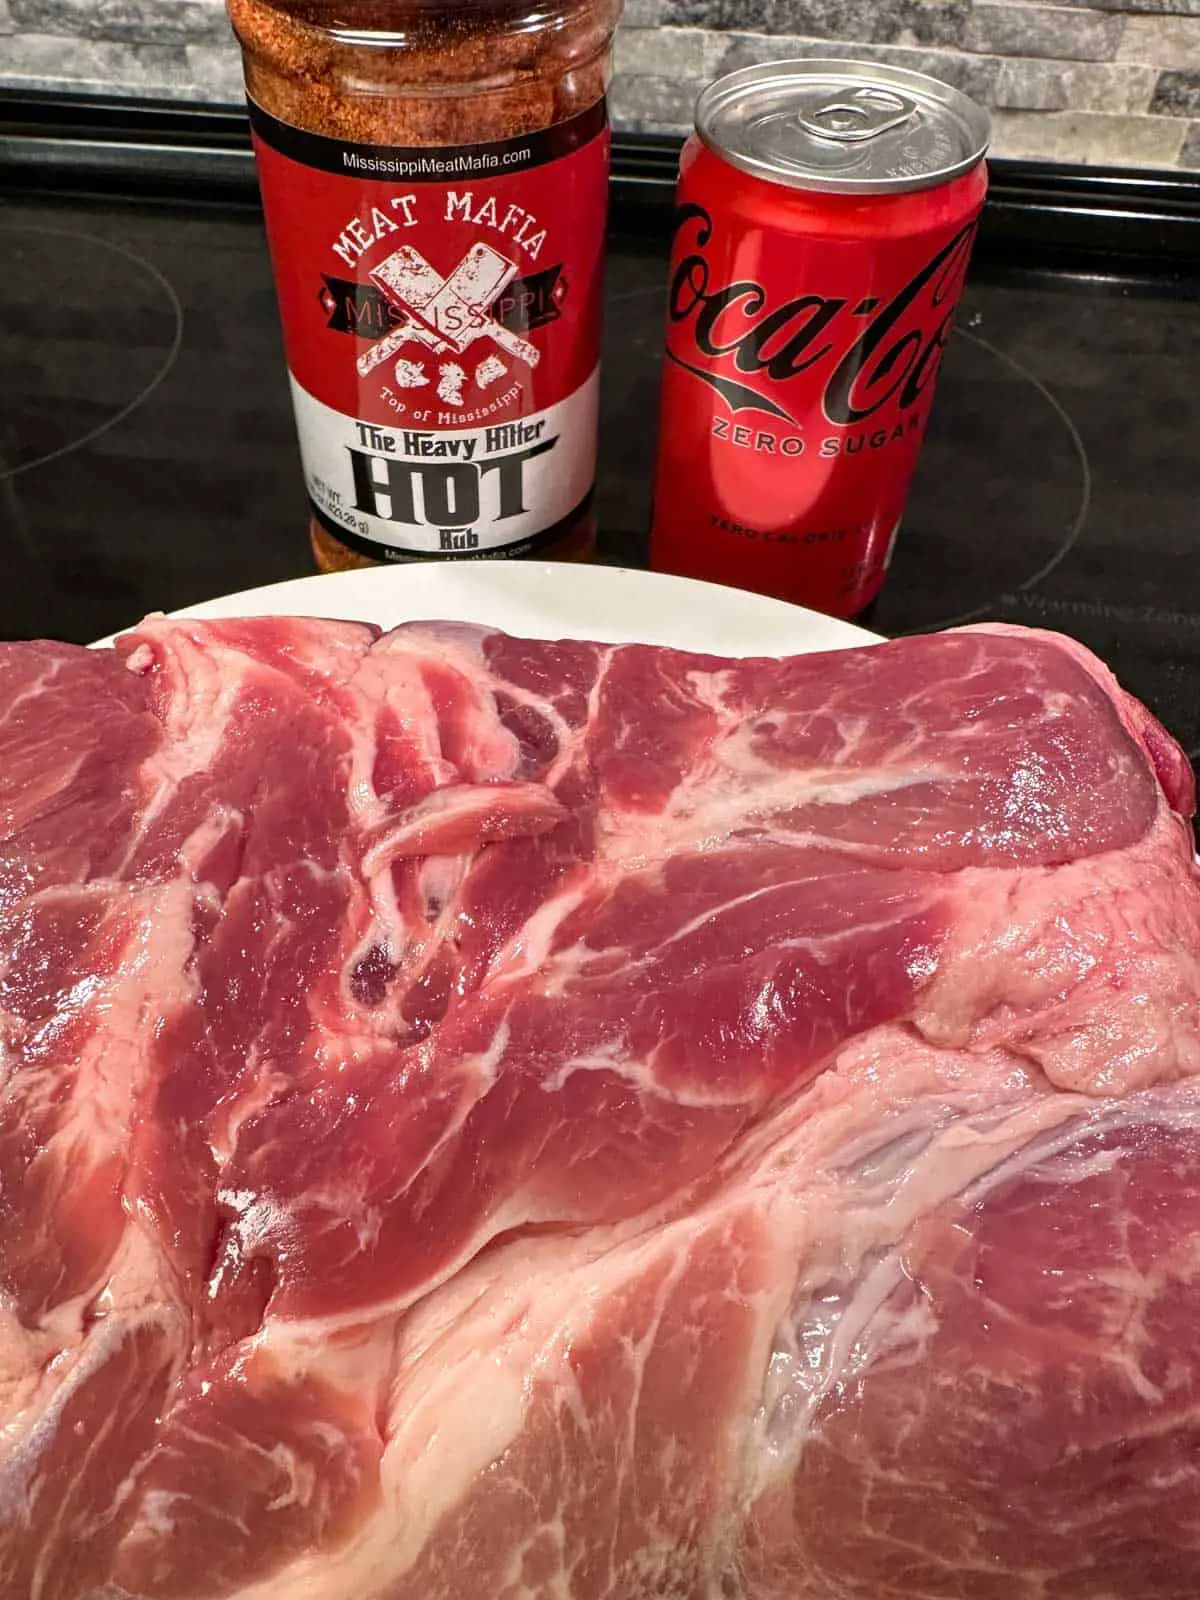 A large piece of pork butt on a white plate, a bottle of Meat Mafia The Heavy Hitter Hot Rub, and a can of Coca Cola Zero.